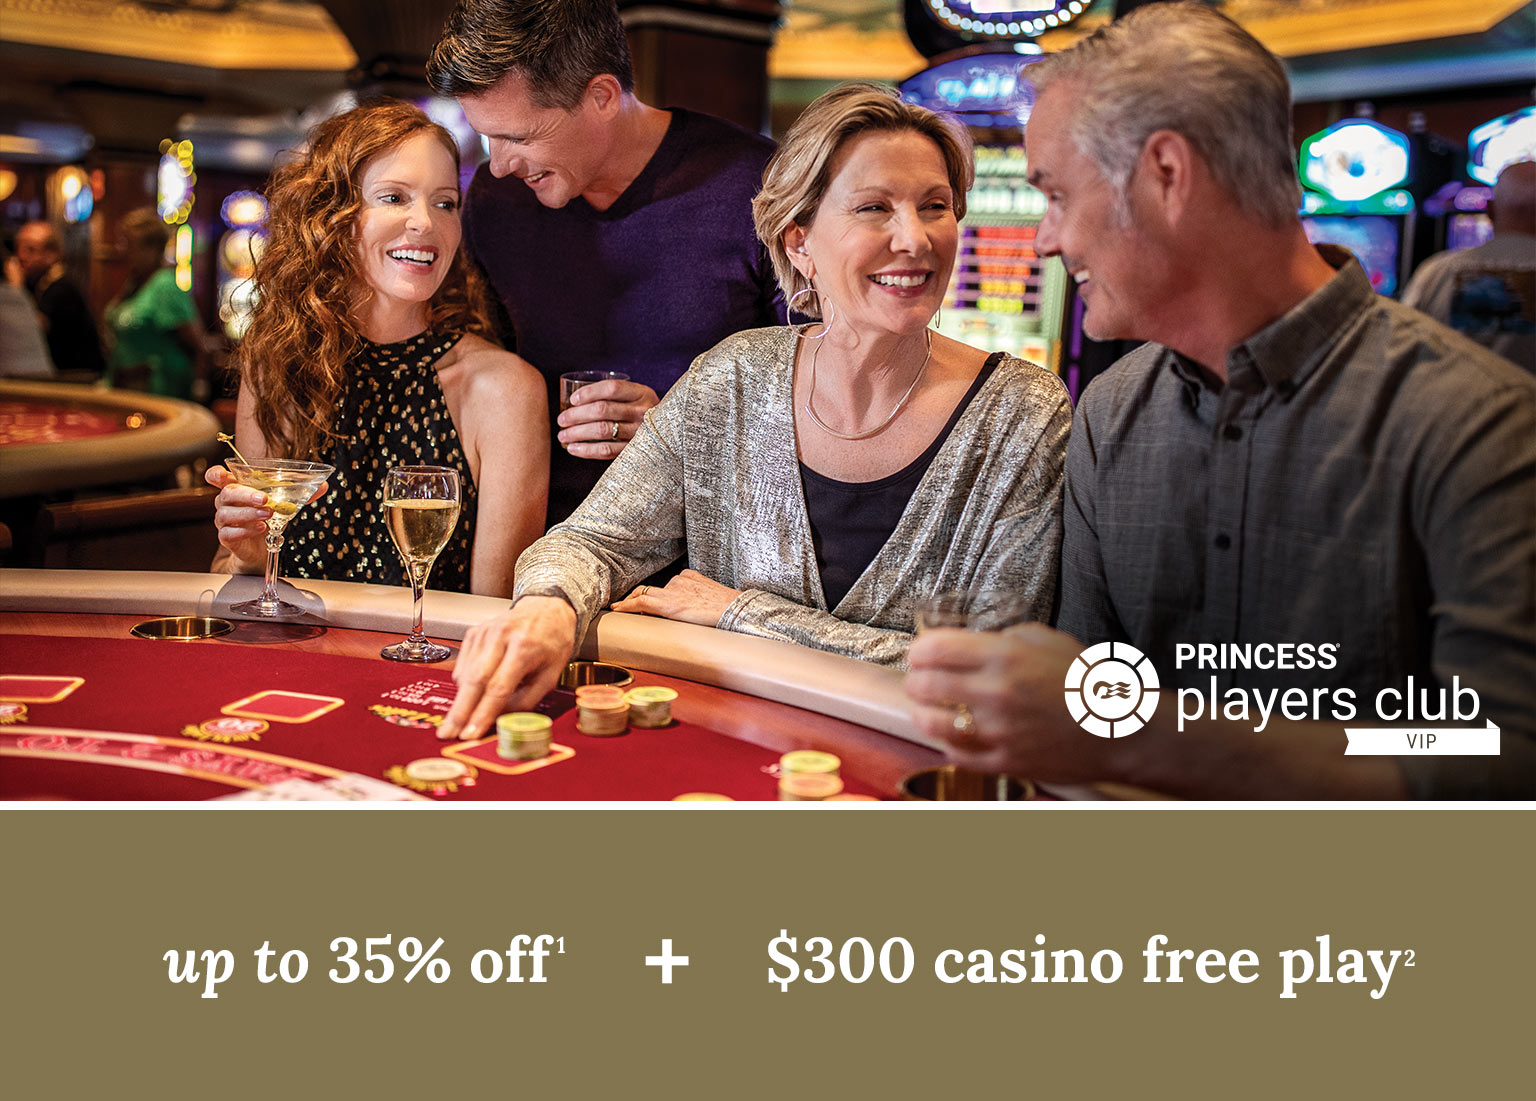 Up to 35% off + $300 casino free play. Click here to book.